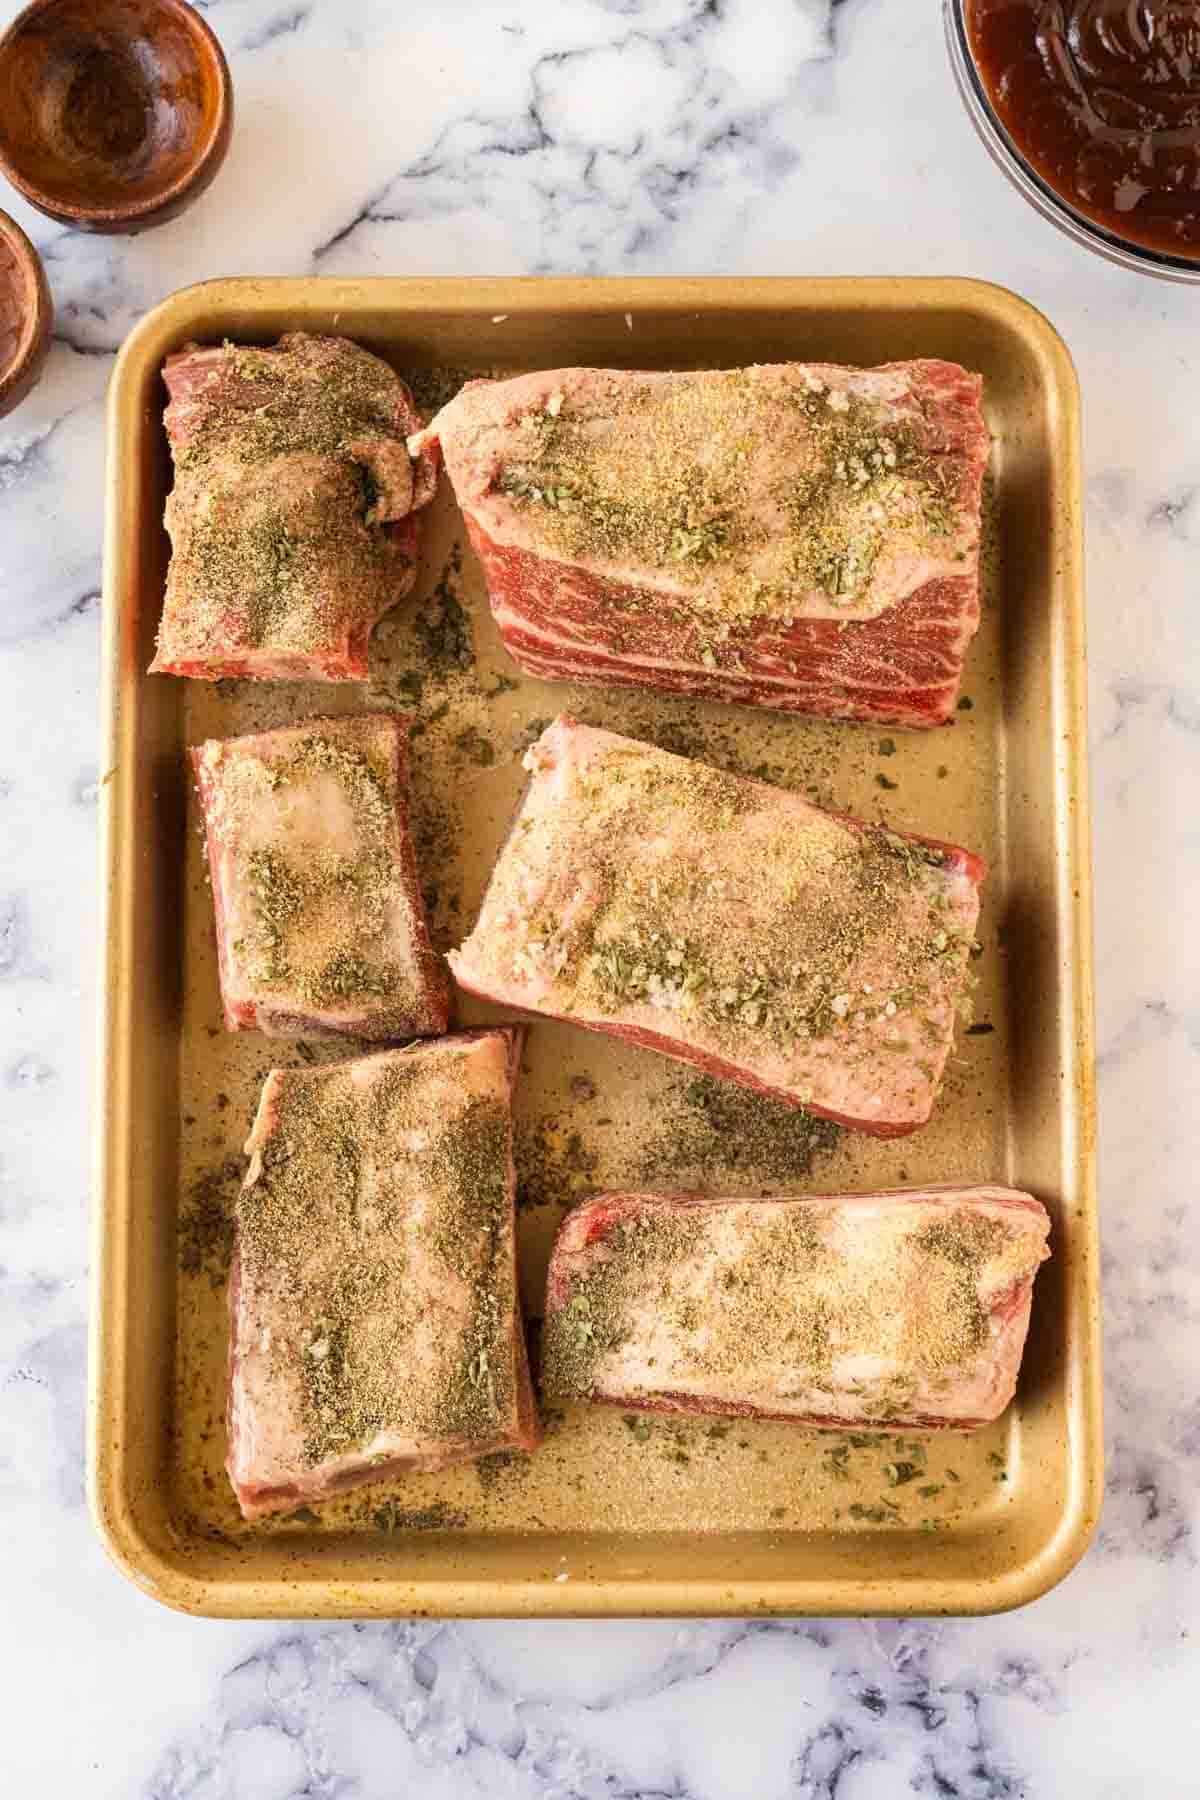 Uncooked beef short ribs on a baking sheet.